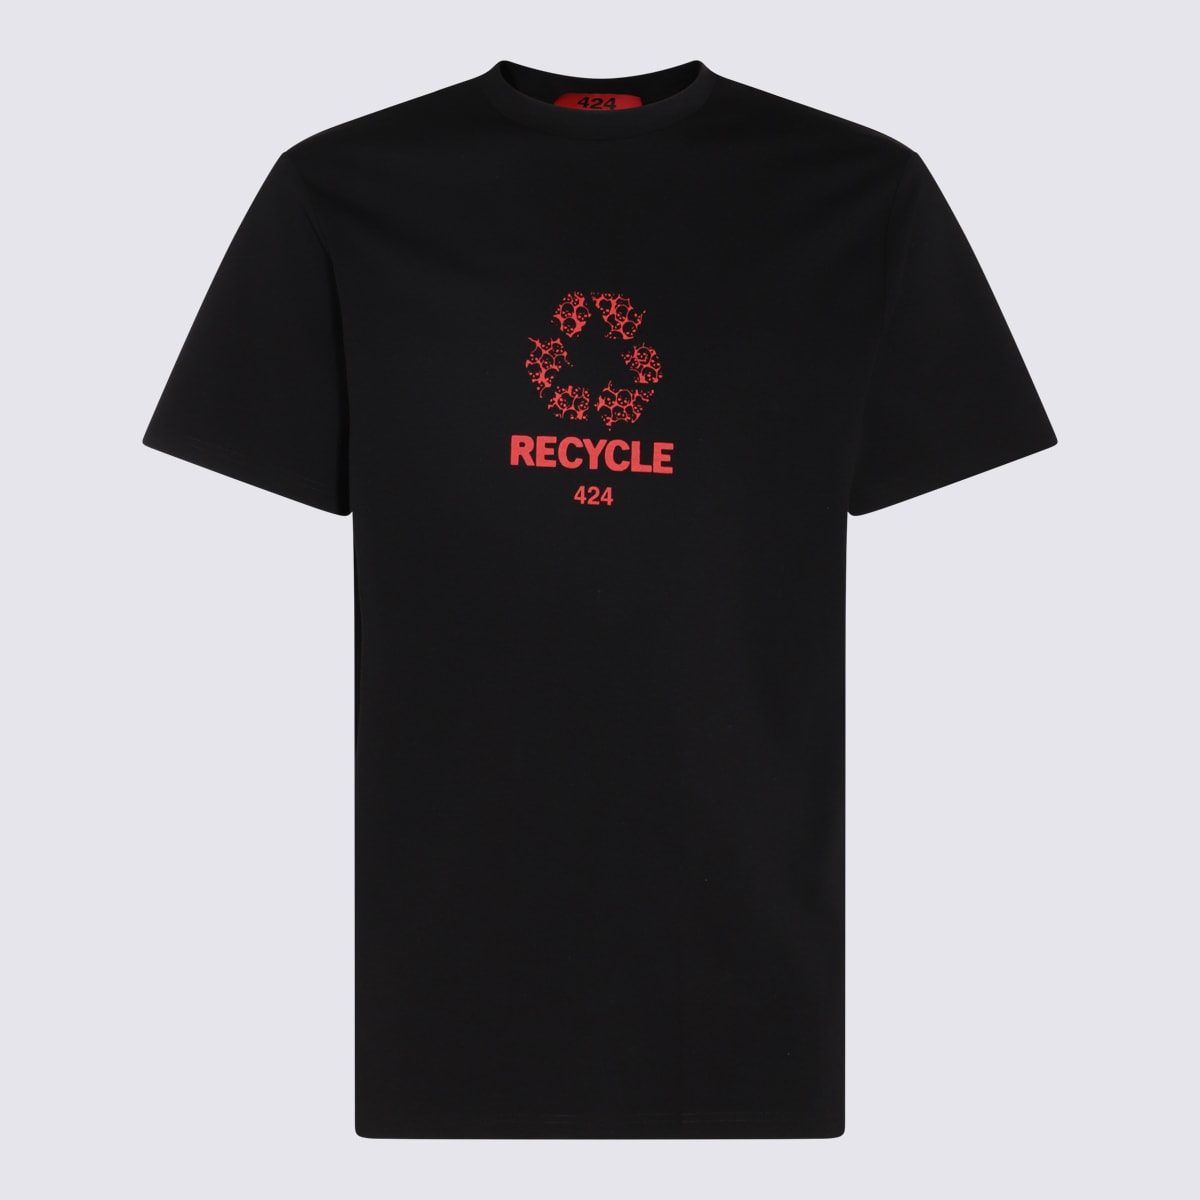 Black And Red Cotton Blend T-shirt